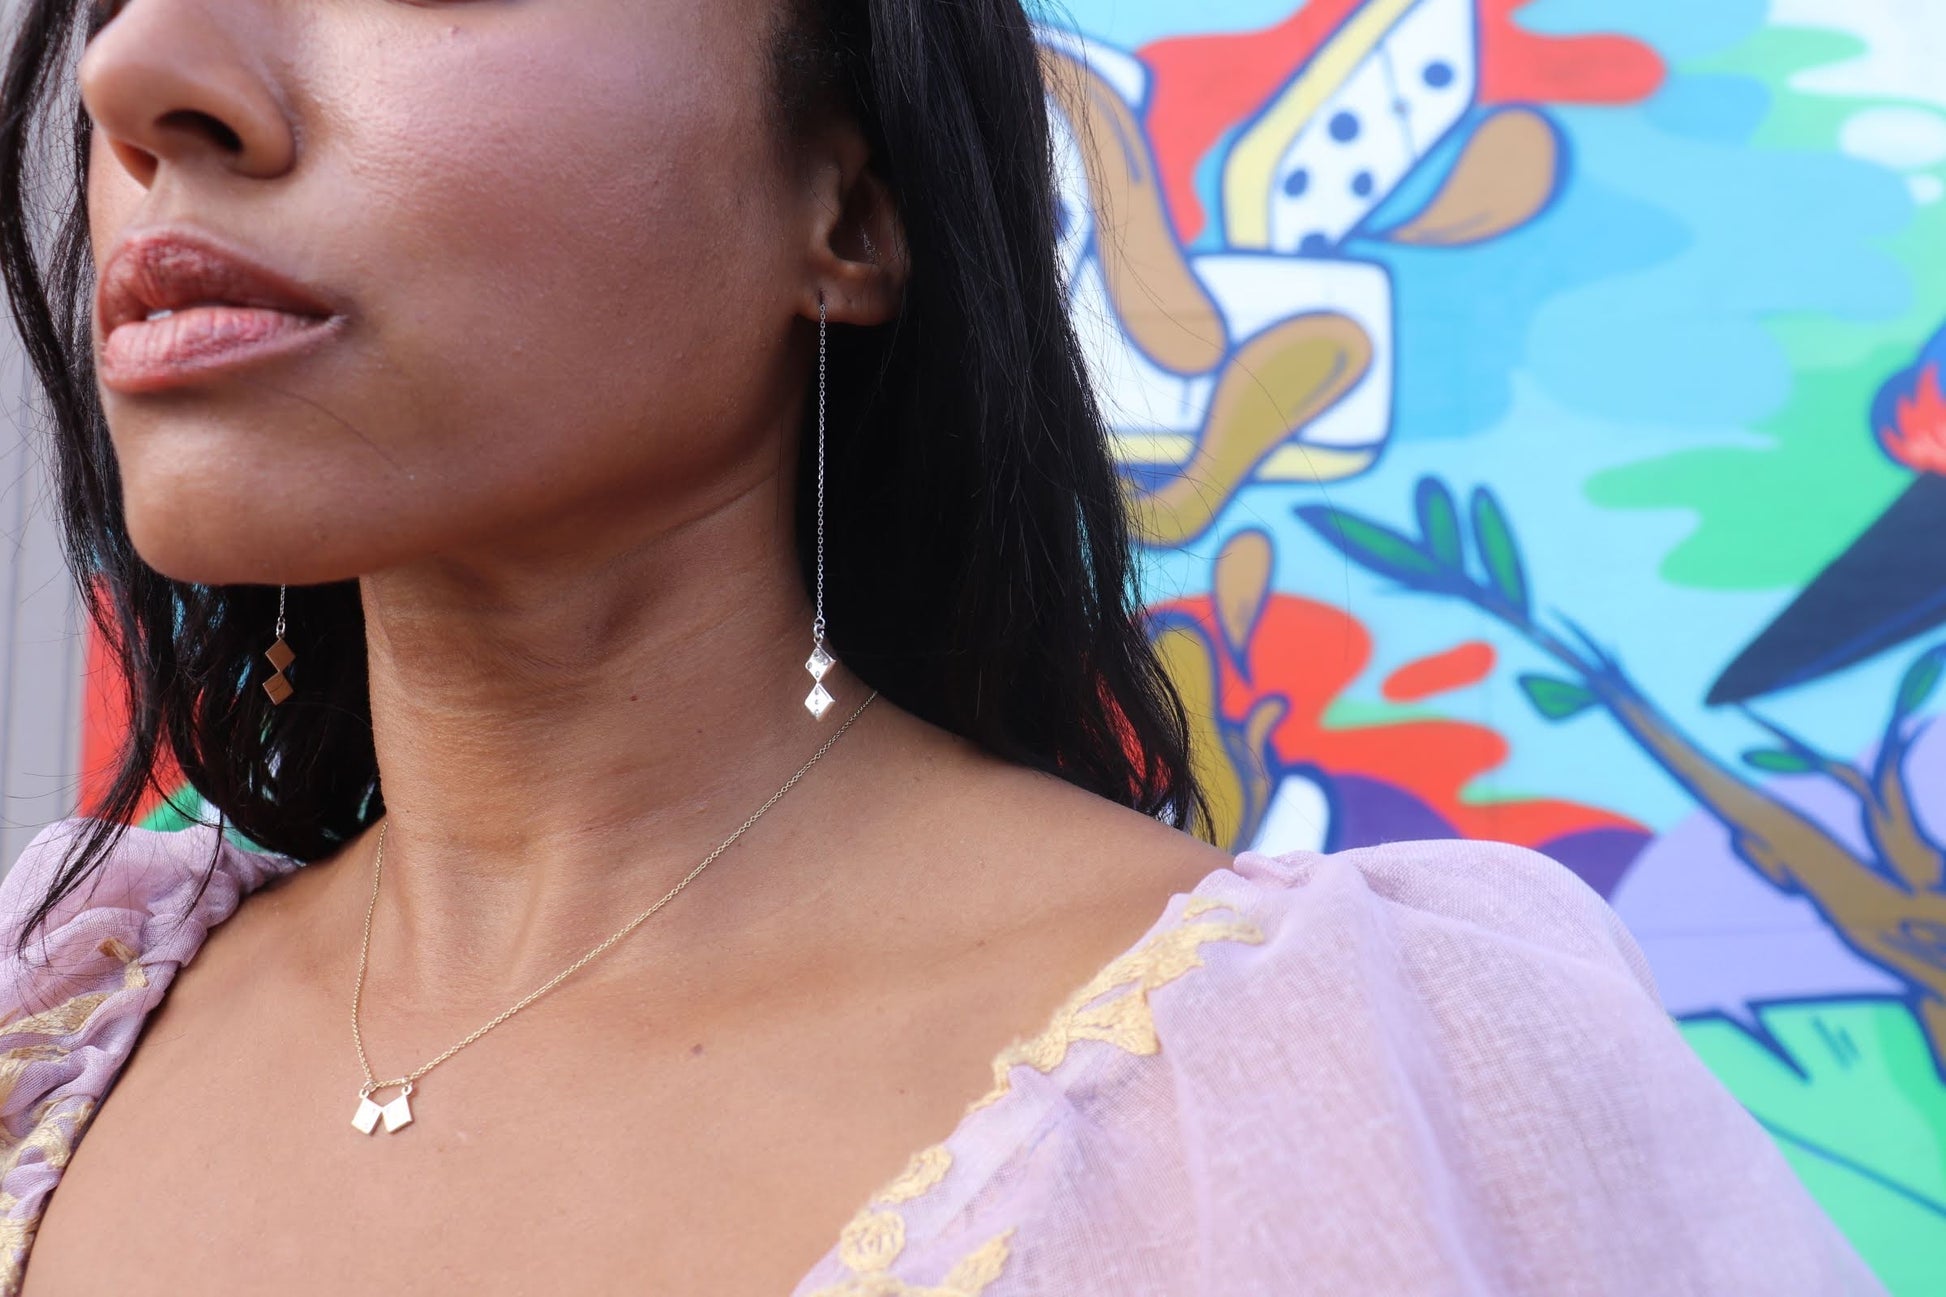 black woman in pink puffy sleeve renaissance blouse standing in front of graffiti wall wearing gold dice necklace and matching earrings from the wandering jewel